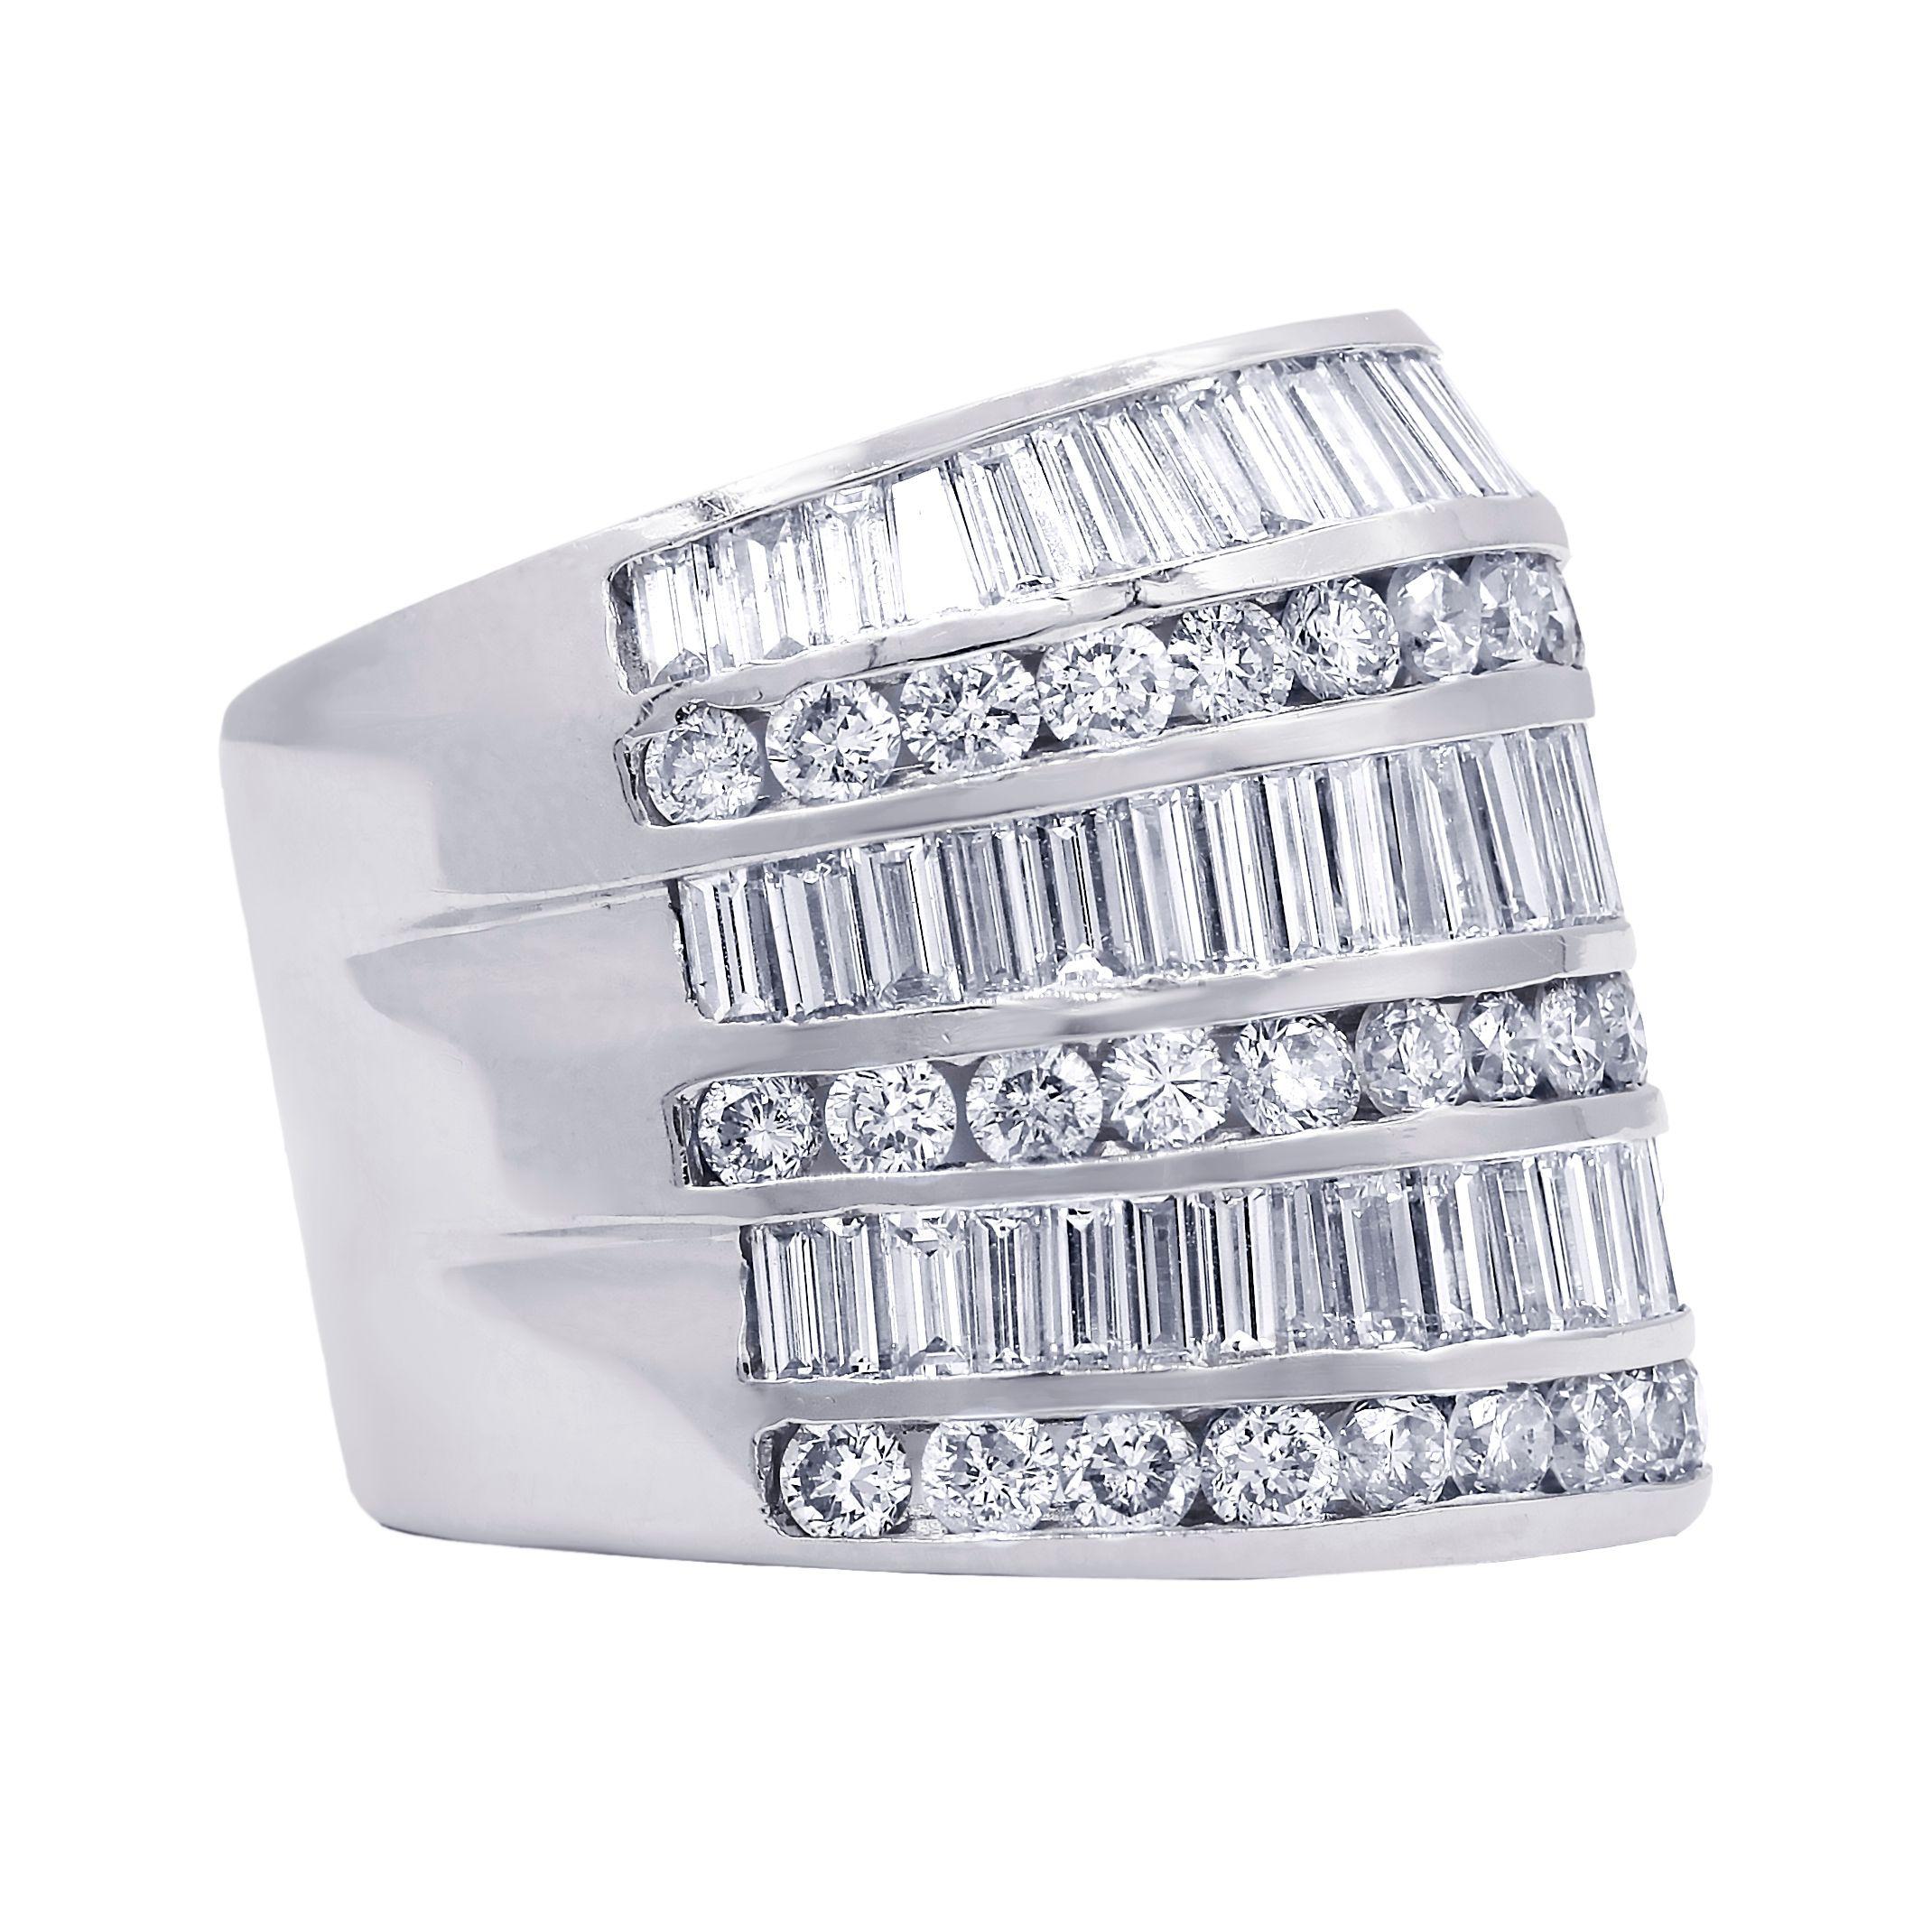 Baguette Cut Diana M. 18 kt White Gold Diamond Fashion Ring Adorned With Alternating Rows  For Sale